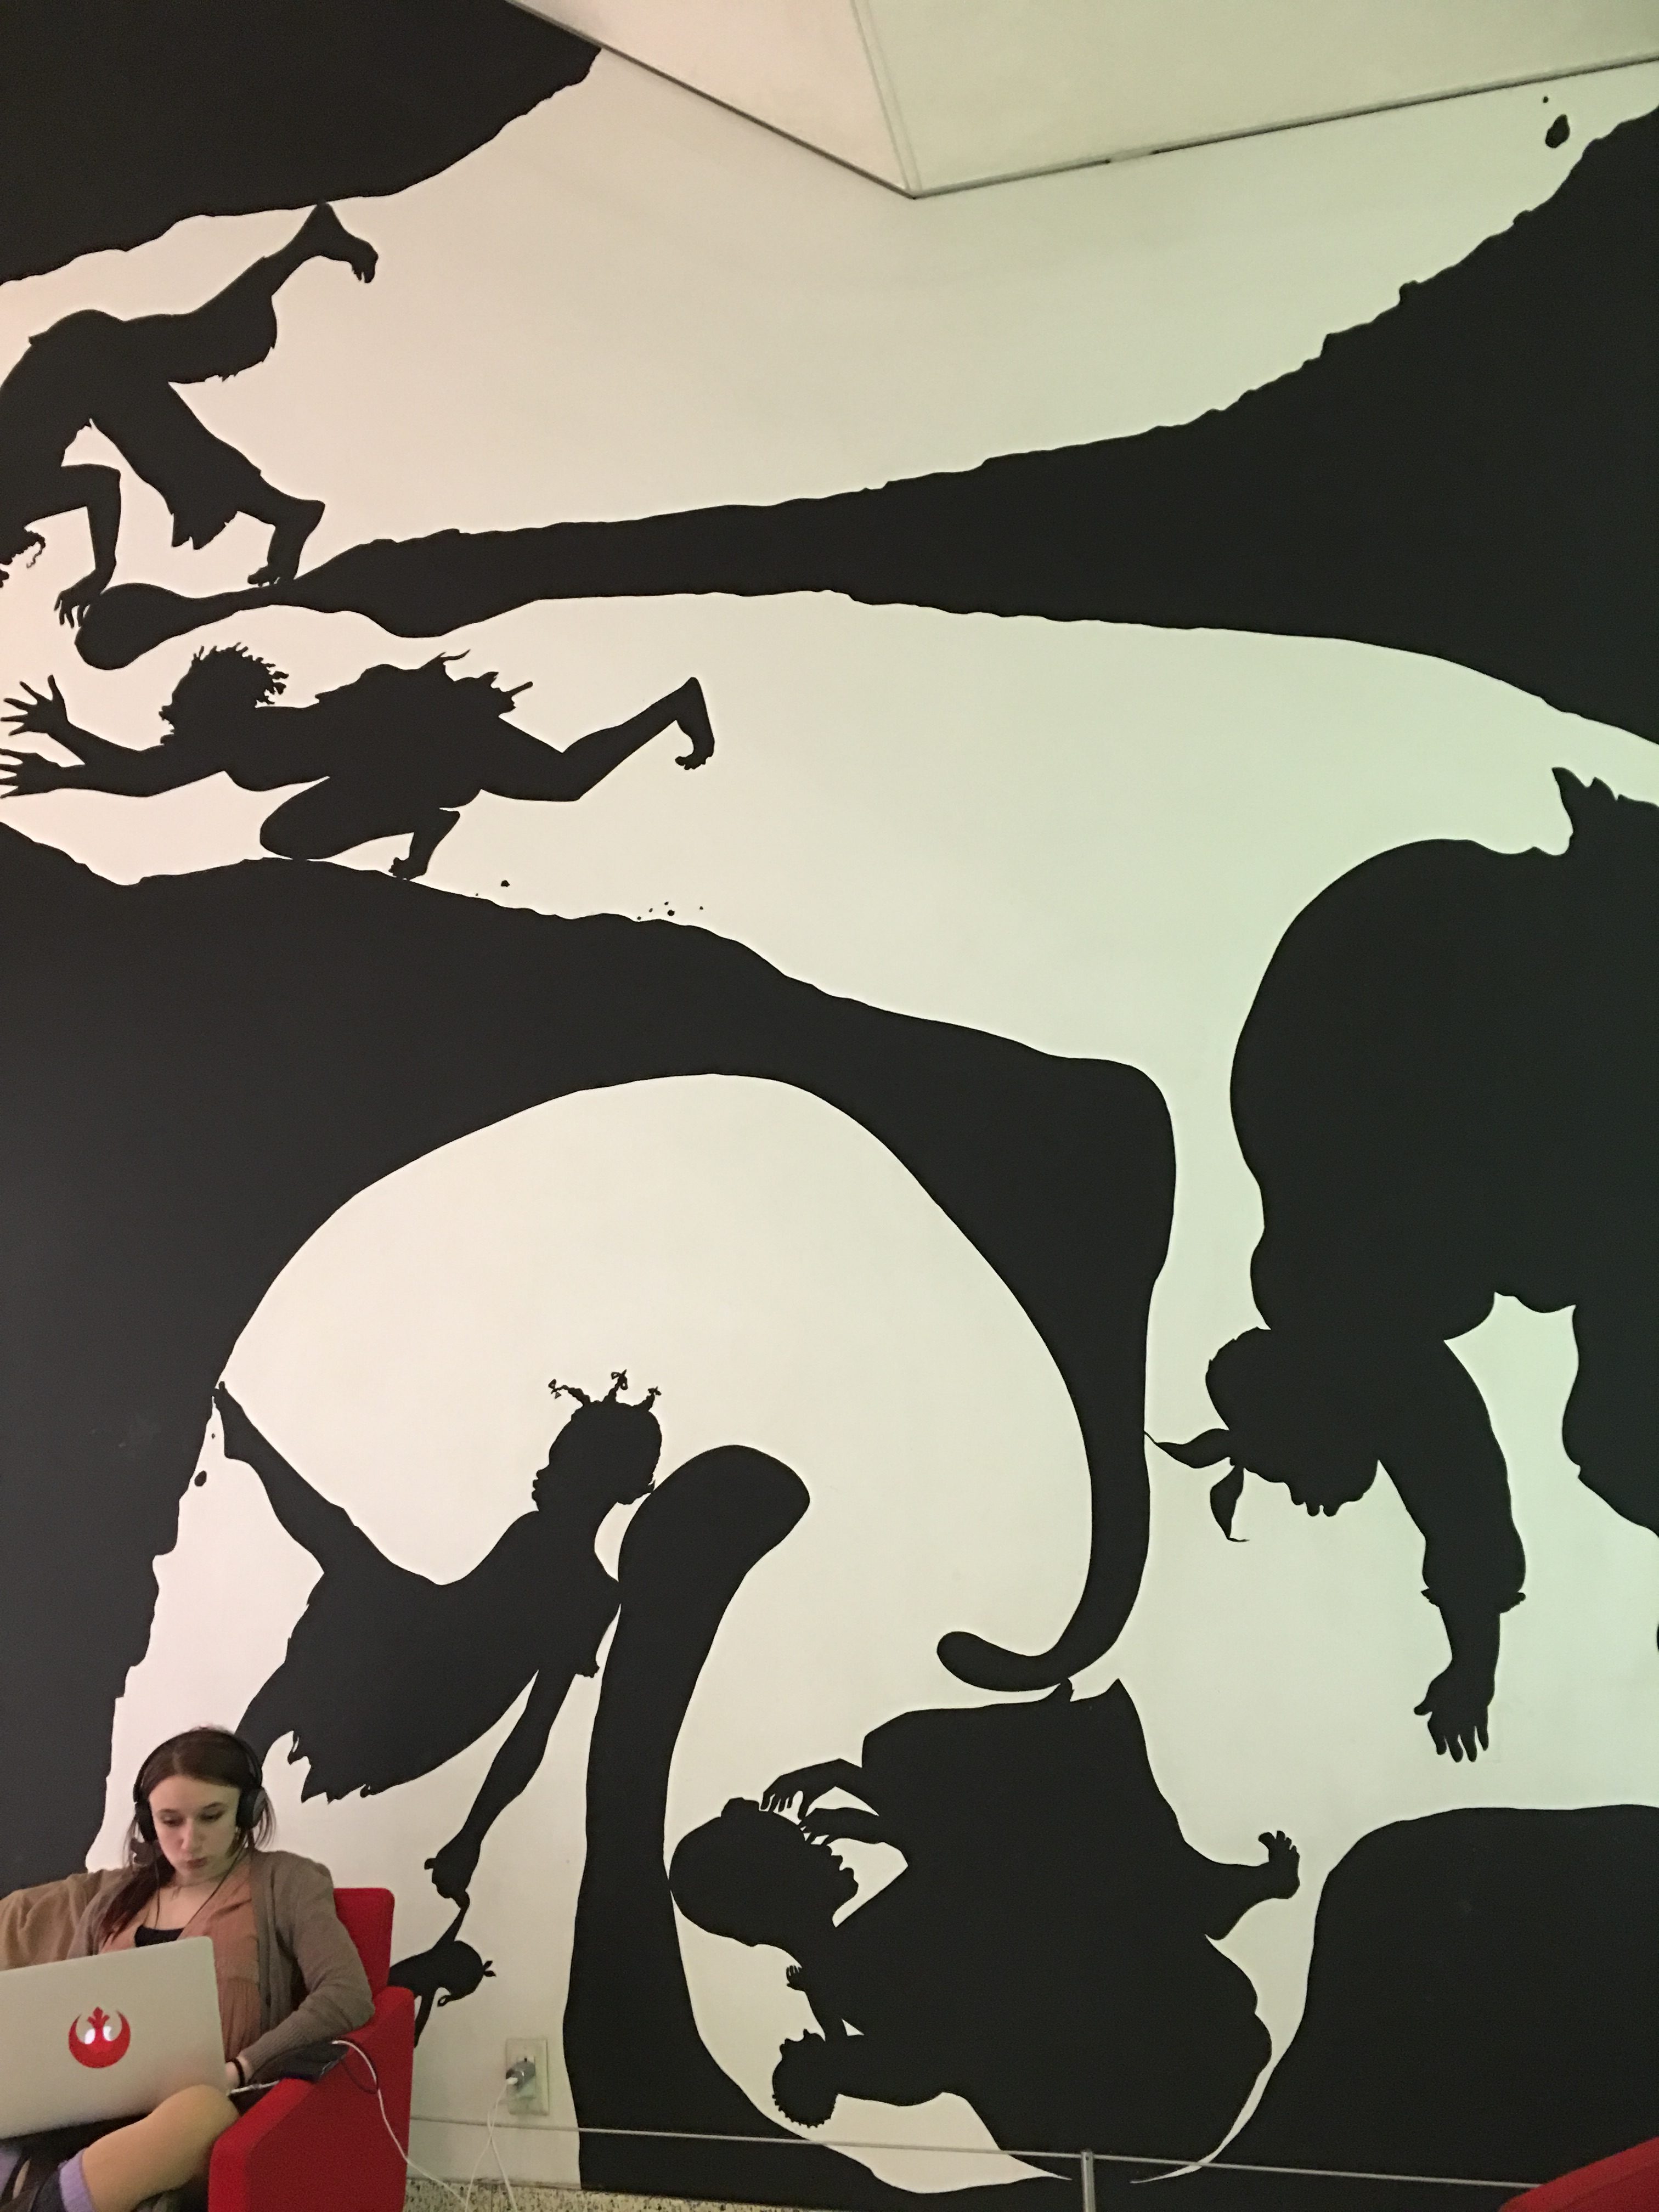 Site Specific Art at the New School: “Event Horizon” by Kara Walker